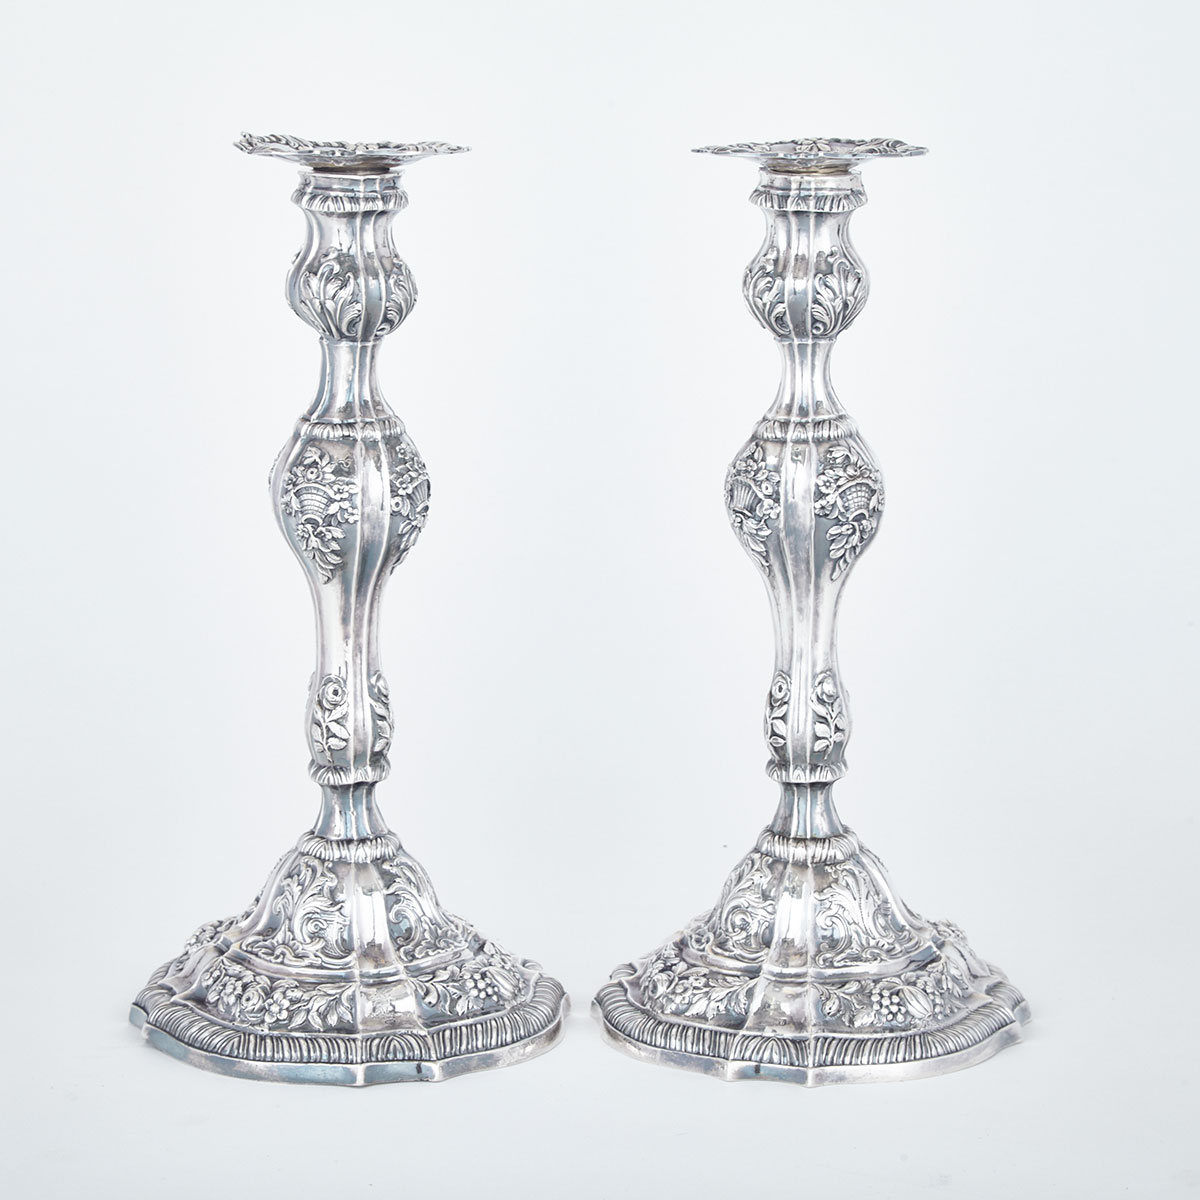 PAIR OF GEORGE III SILVER TABLE CANDLESTICKS, WILLIAM TUITE, LONDON, 1765 with fluted baluster stems